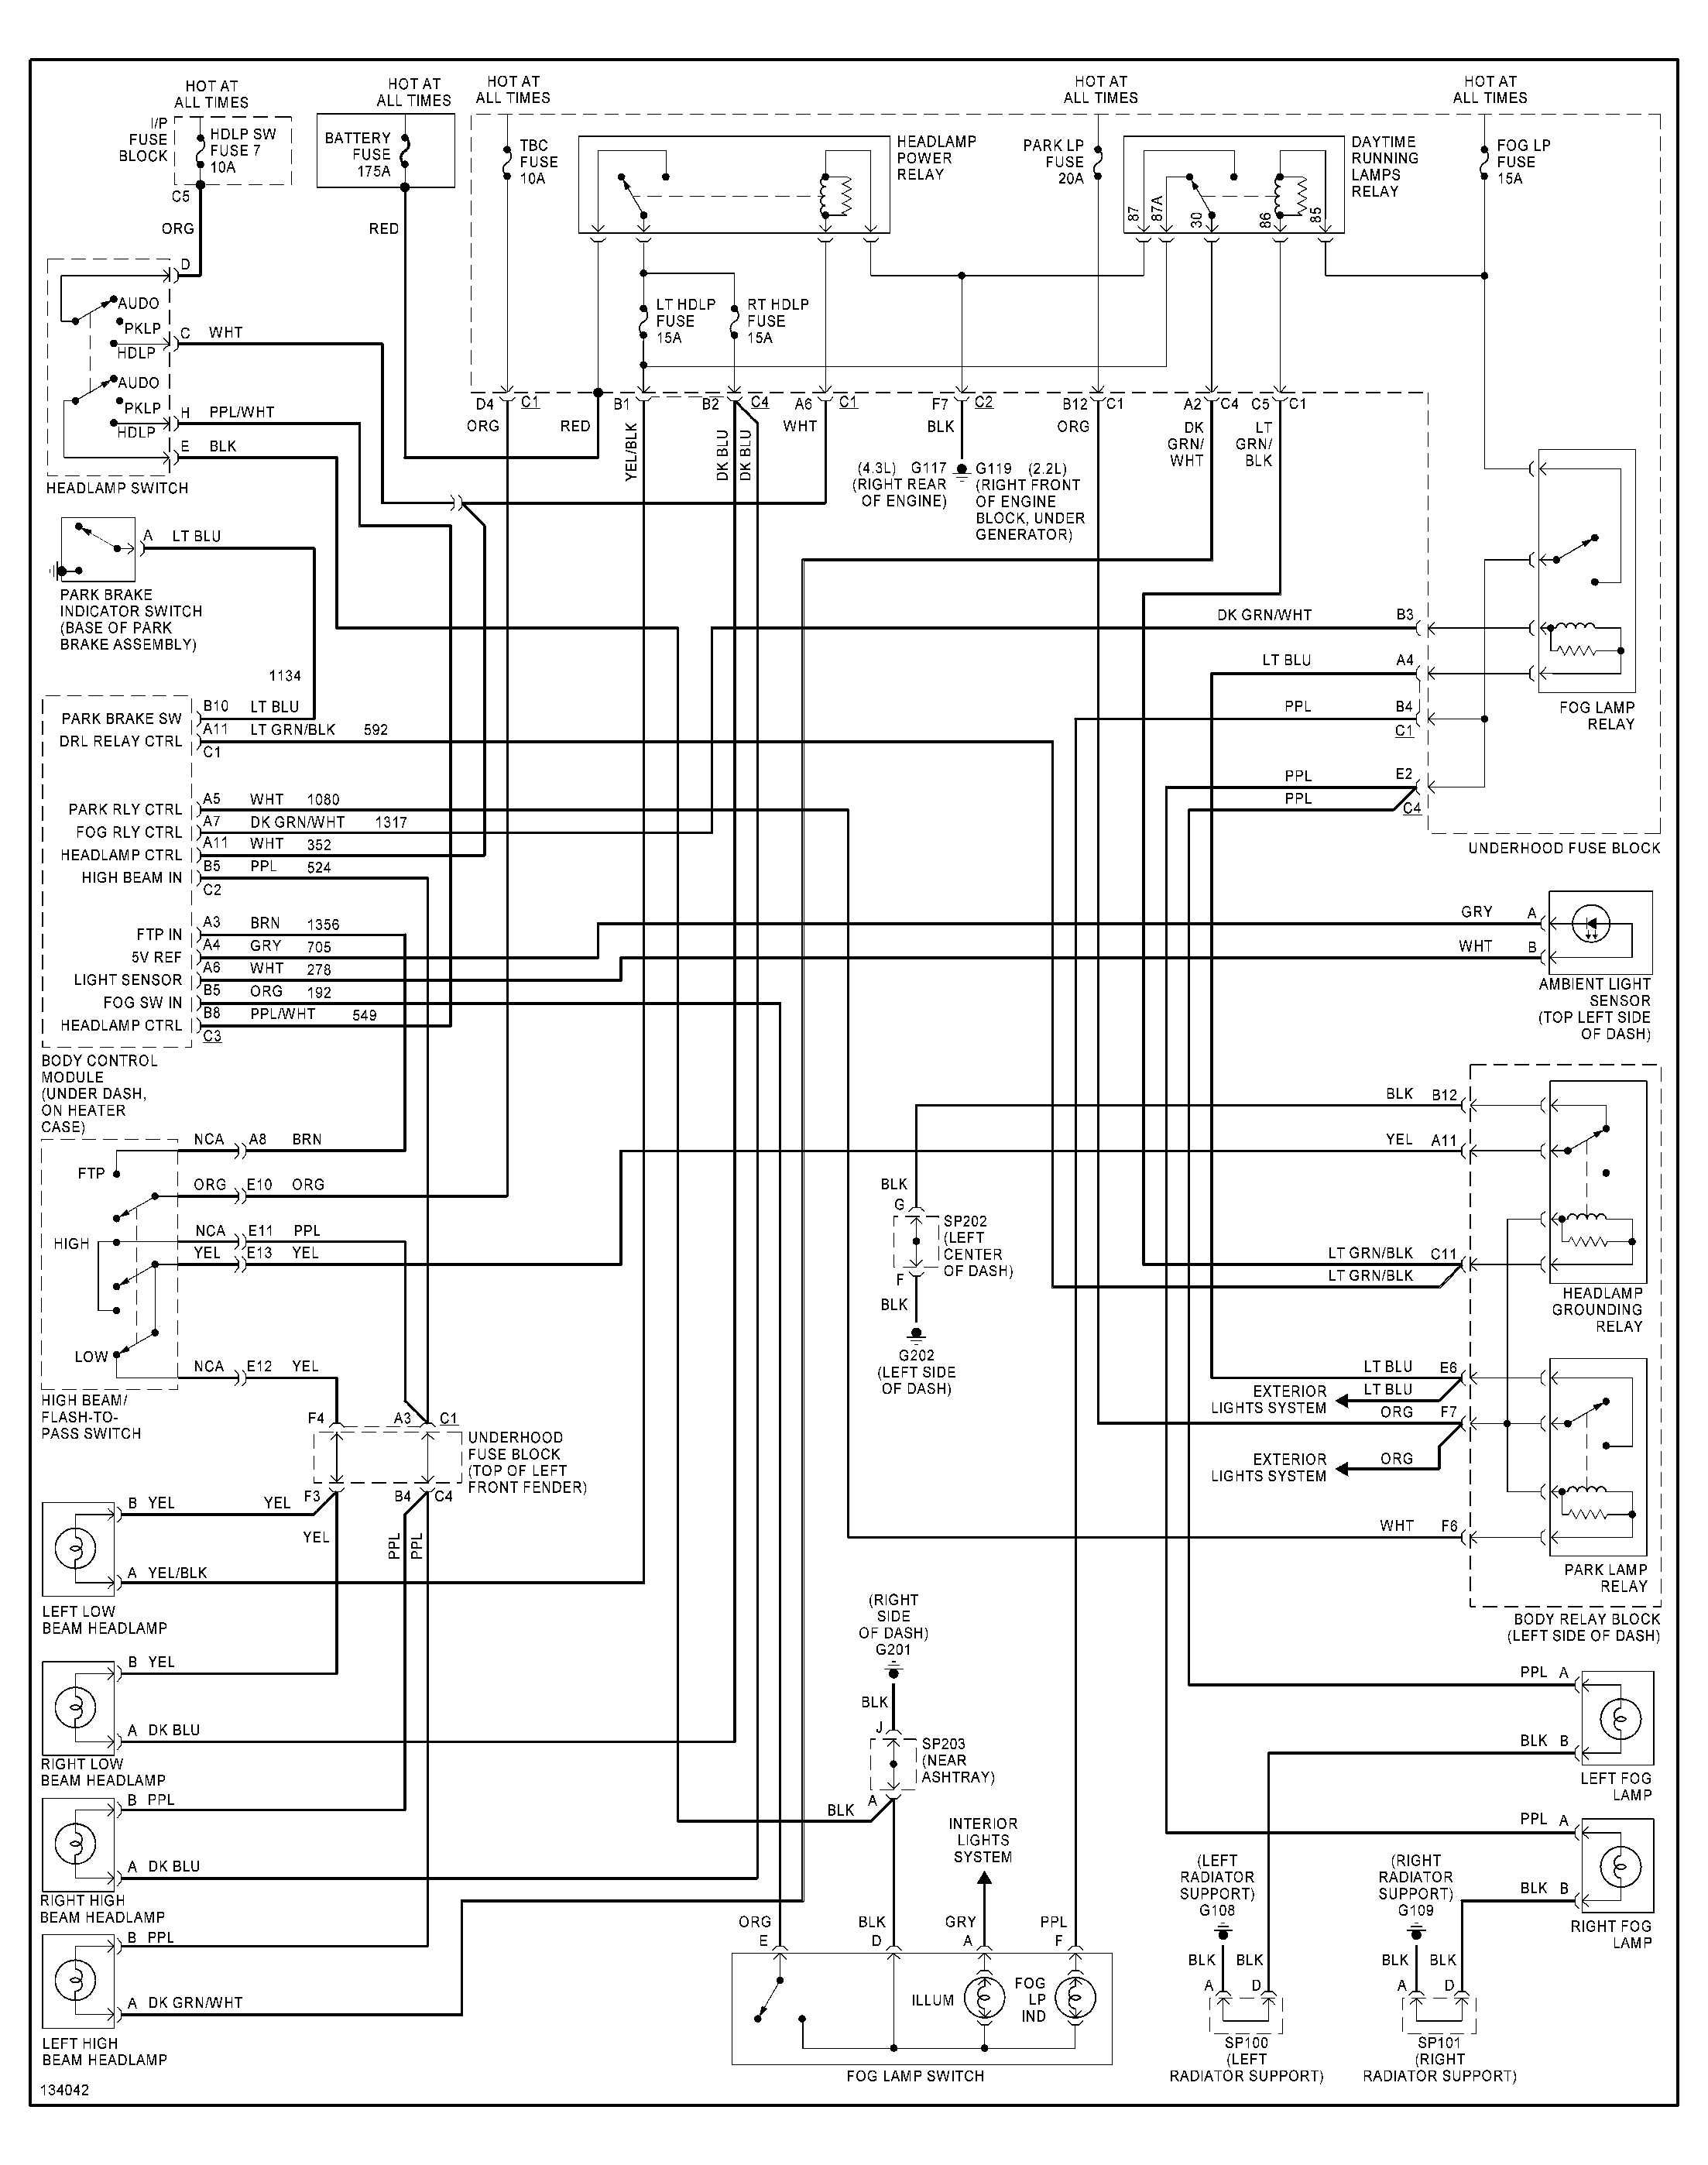 Color Code Wiring Diagram For Power Window Switch Drivers Side 1082 Chevy S10 from blazerforum.com